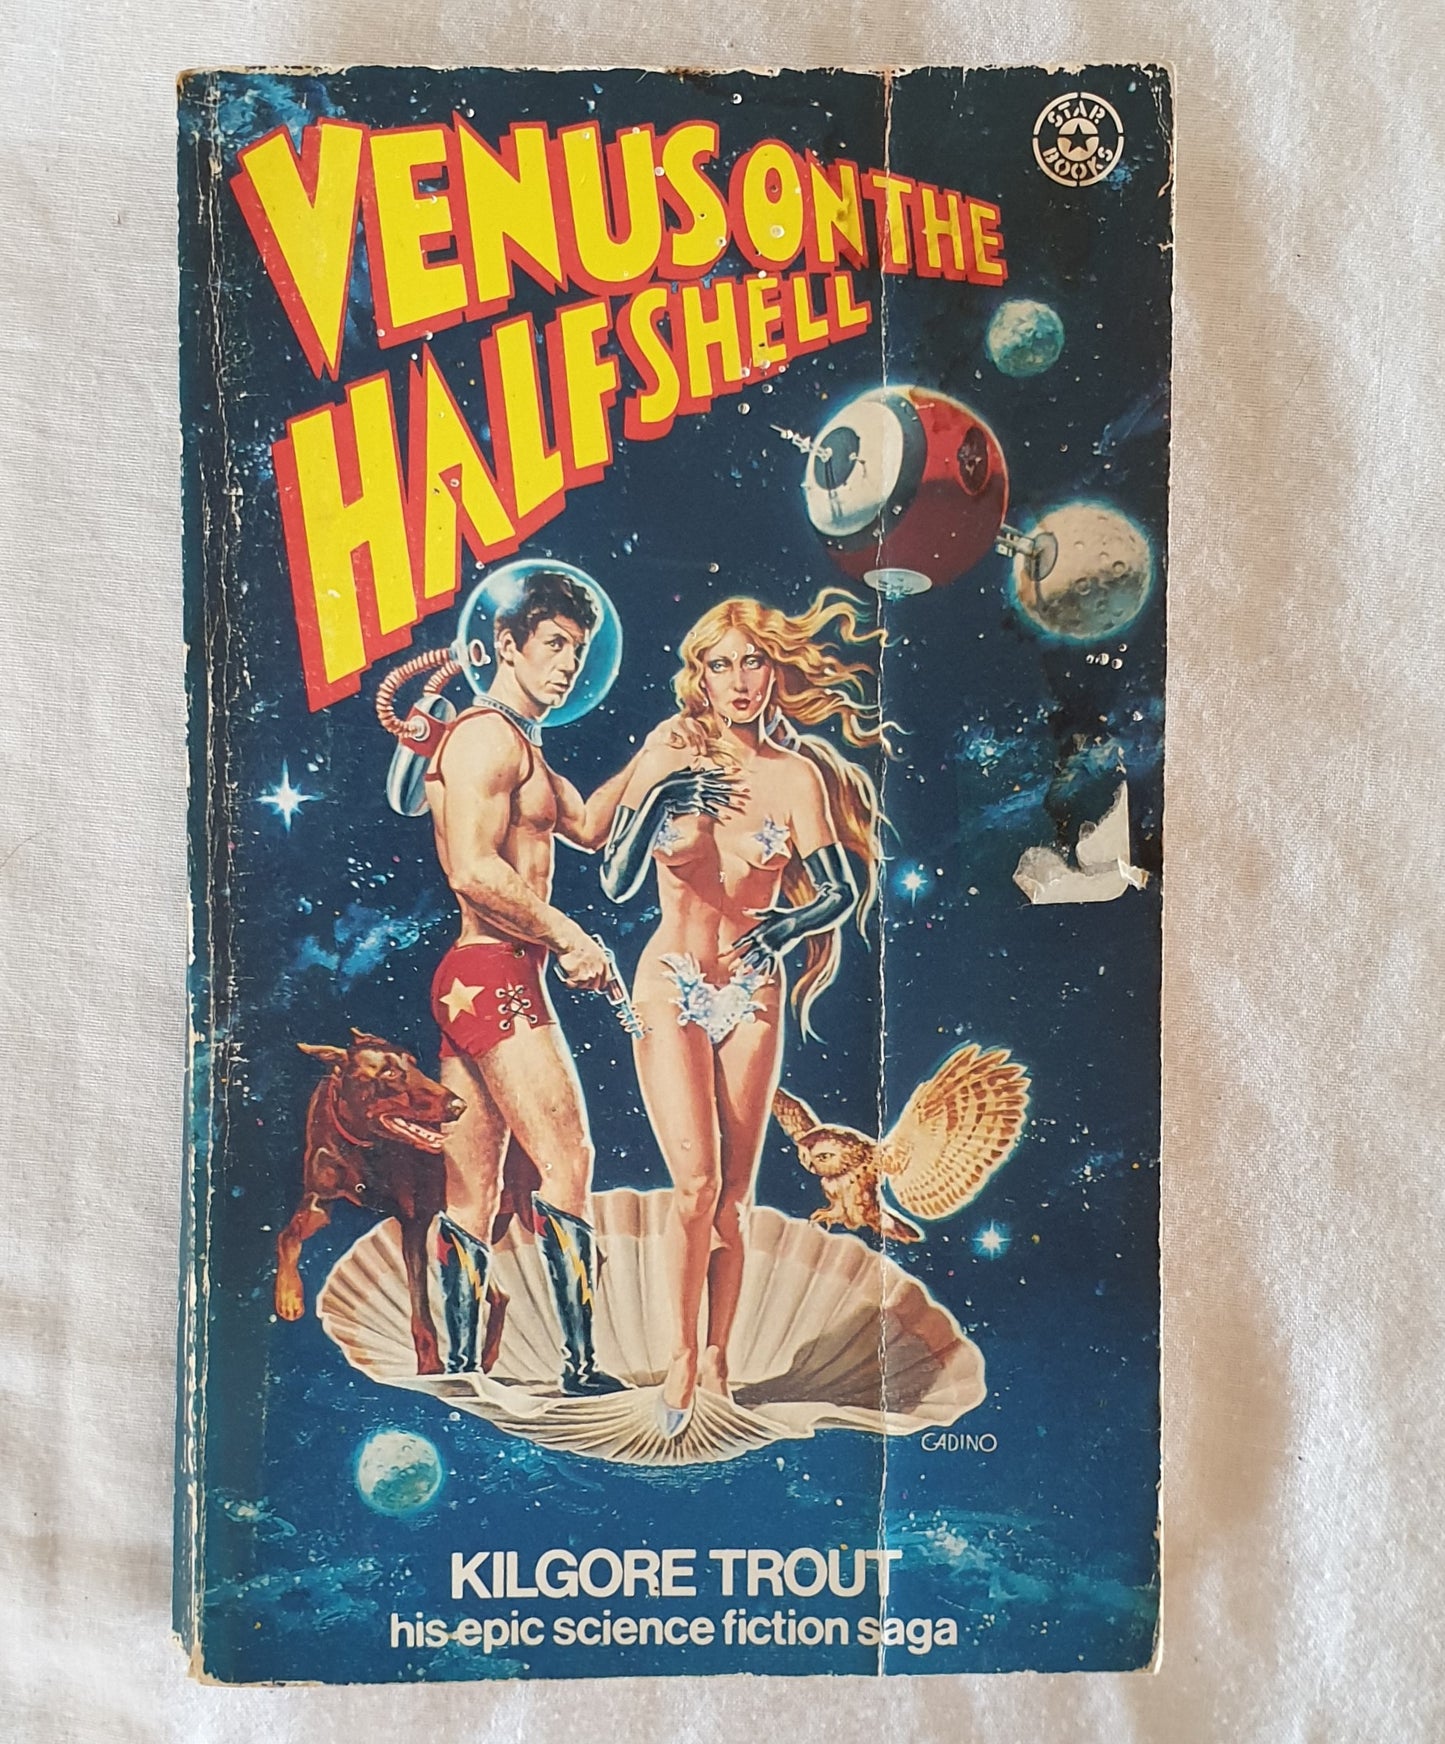 Venus on the Half Shell  by Kilgore Trout